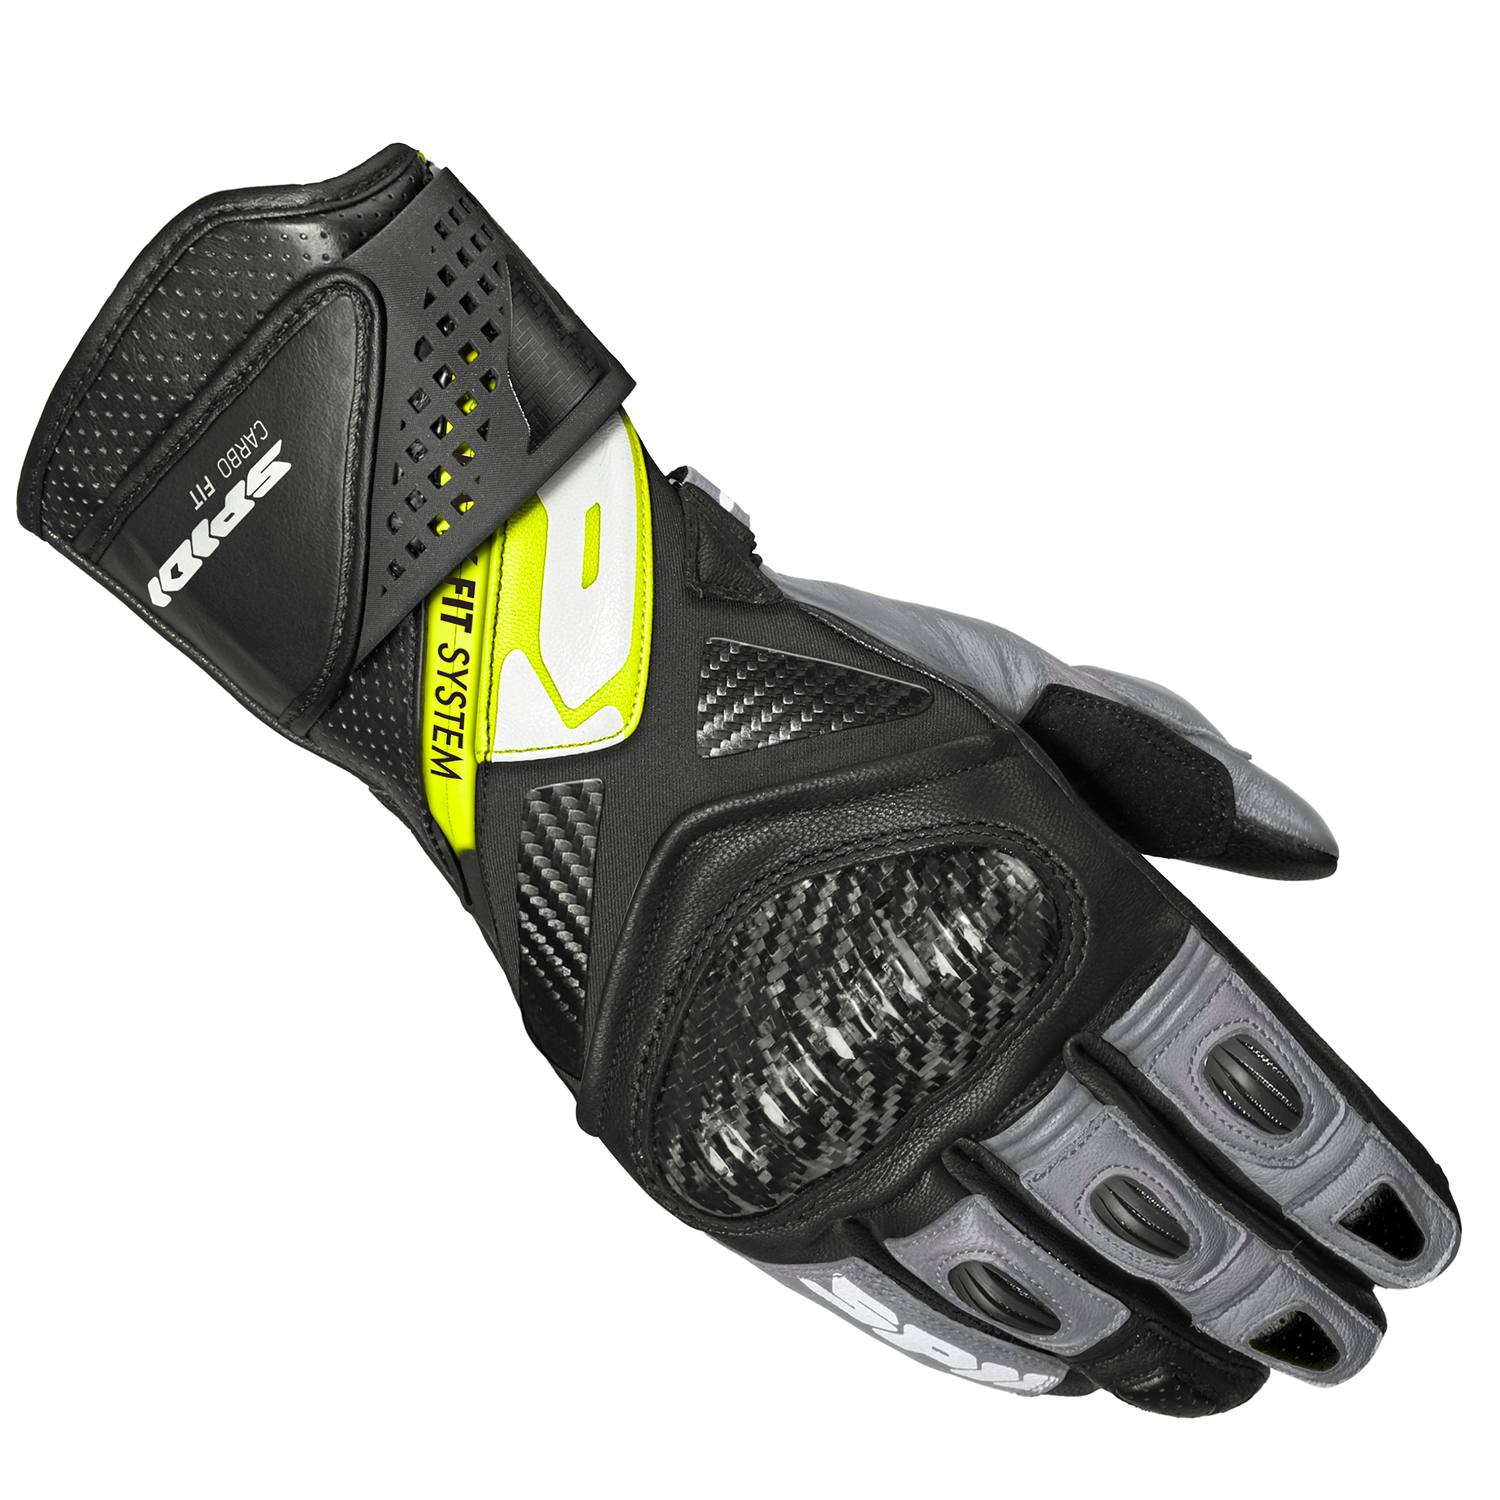 Image of Spidi Carbo Fit Gloves Black Fluorescente Yellow Taille 2XL